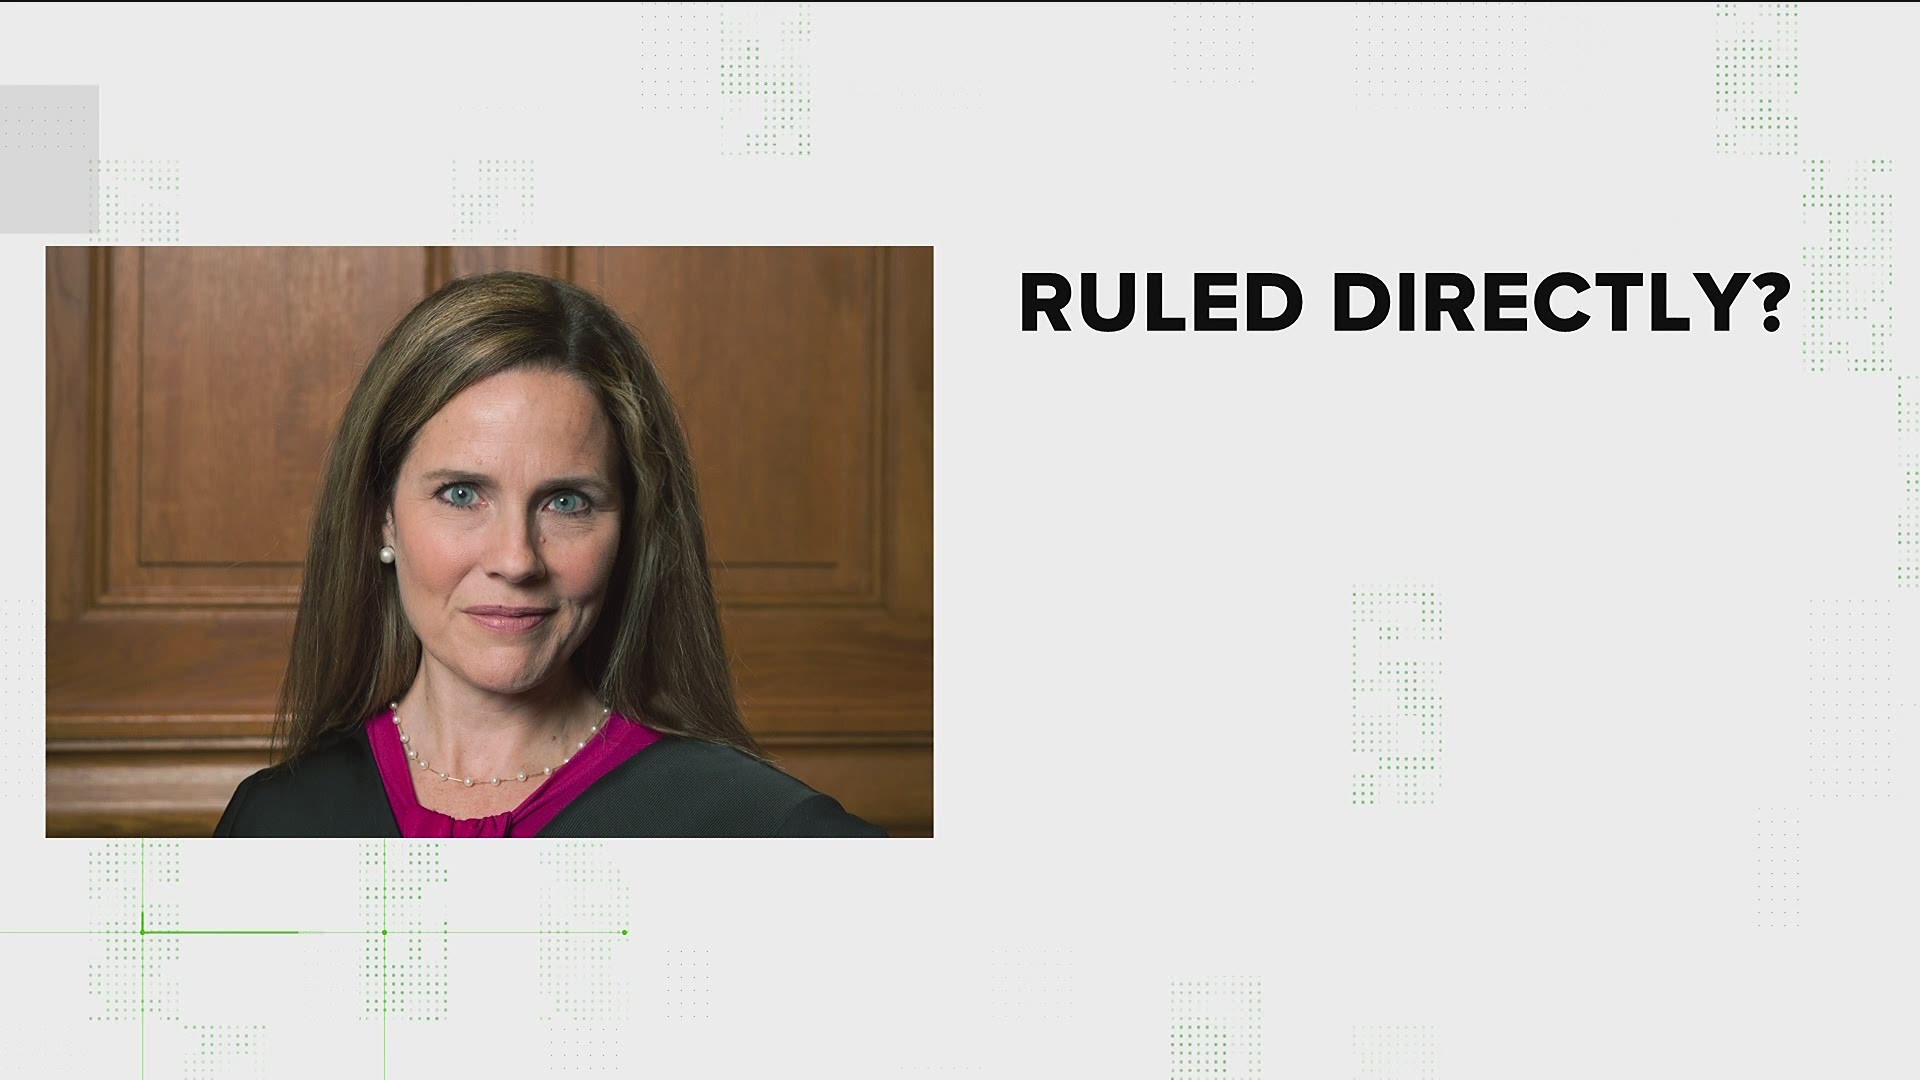 The Verify team spoke with legal experts to compile a list of the most meaningful rulings and votes by Amy Coney Barrett, a front-runner for Supreme Court seat.